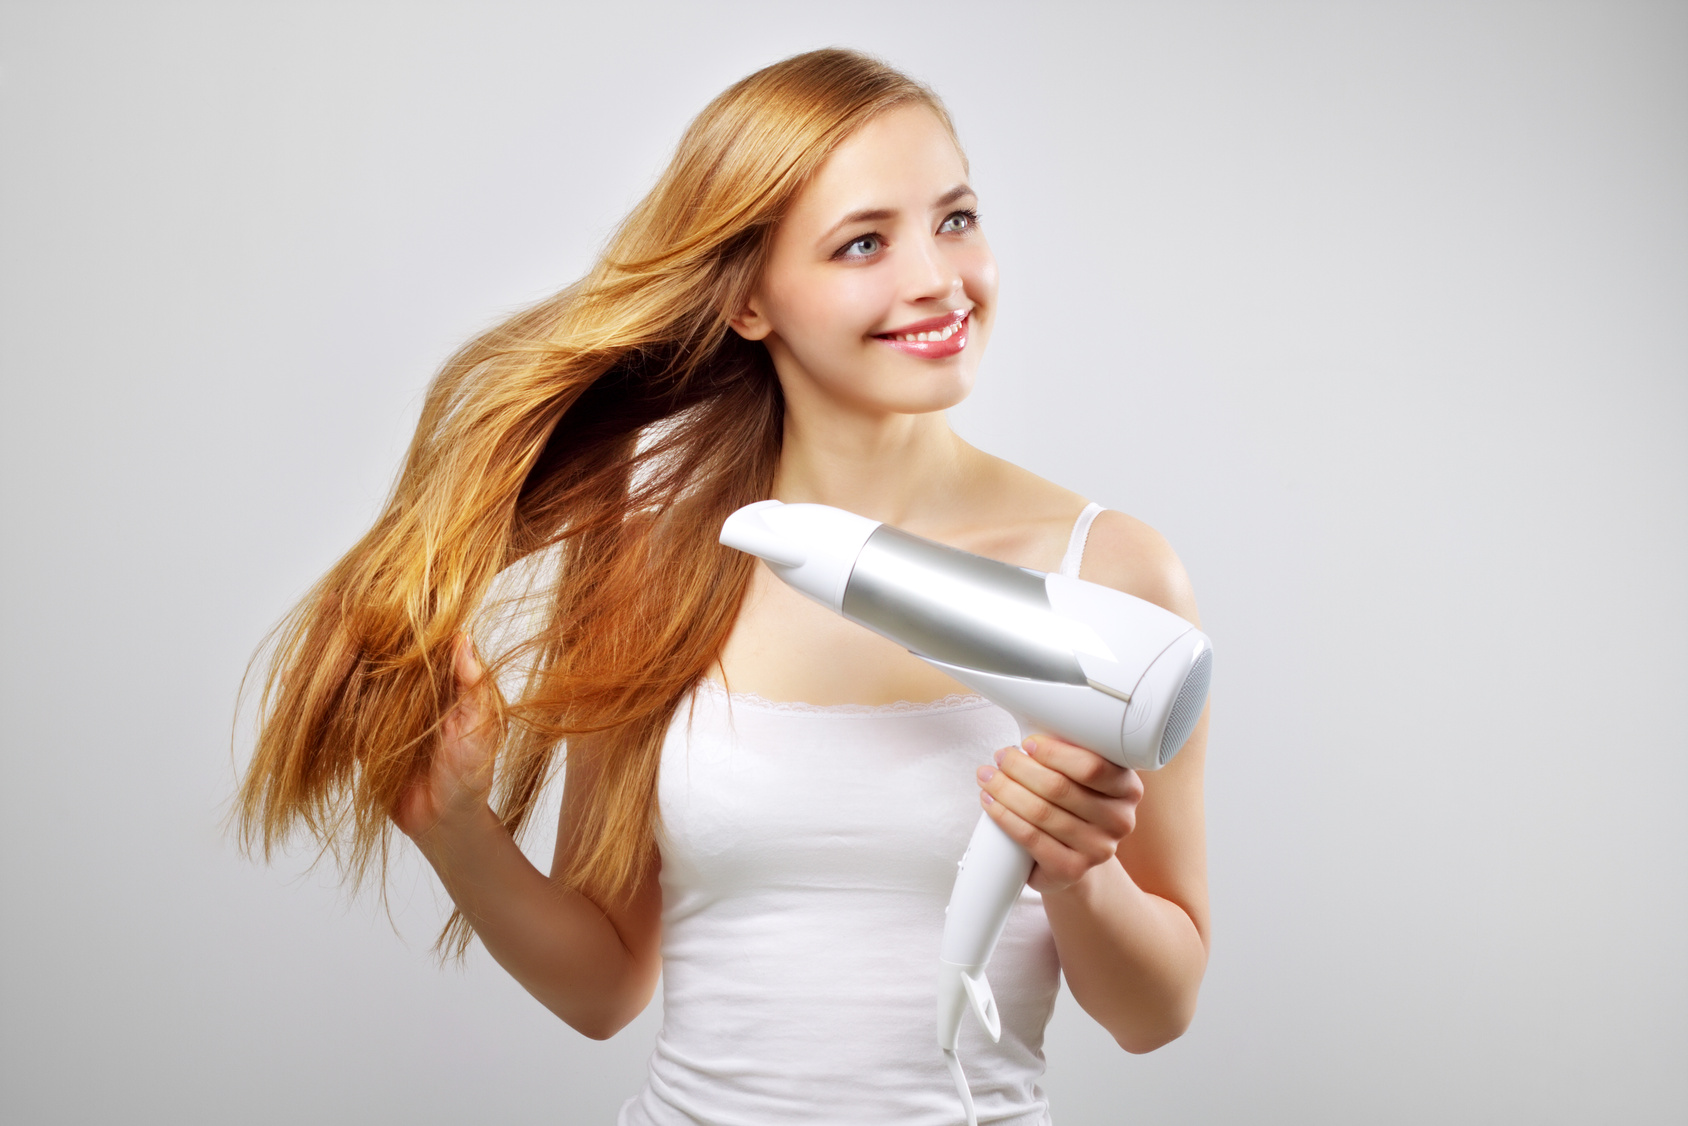 Beautiful smiling girl drying her hair with a blow dryer